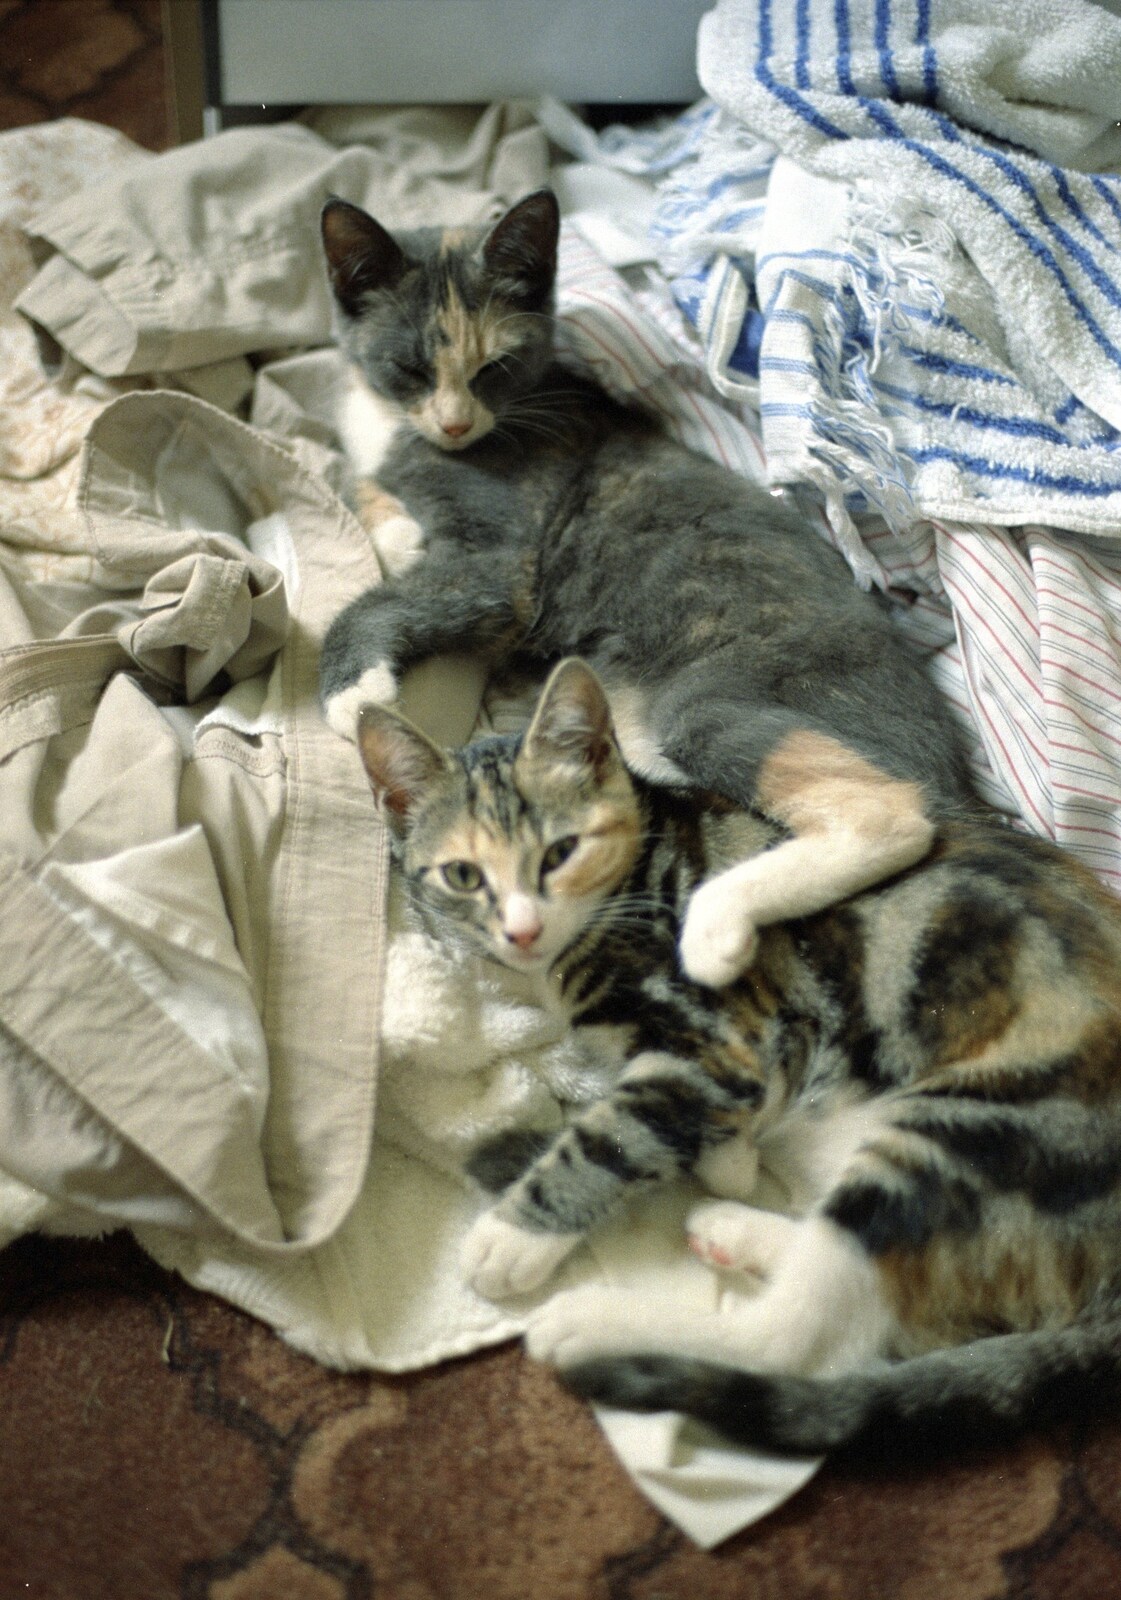 Tone's kittens are in the laundry from Tone's Wedding, Mundford, Norfolk - 27th August 1994